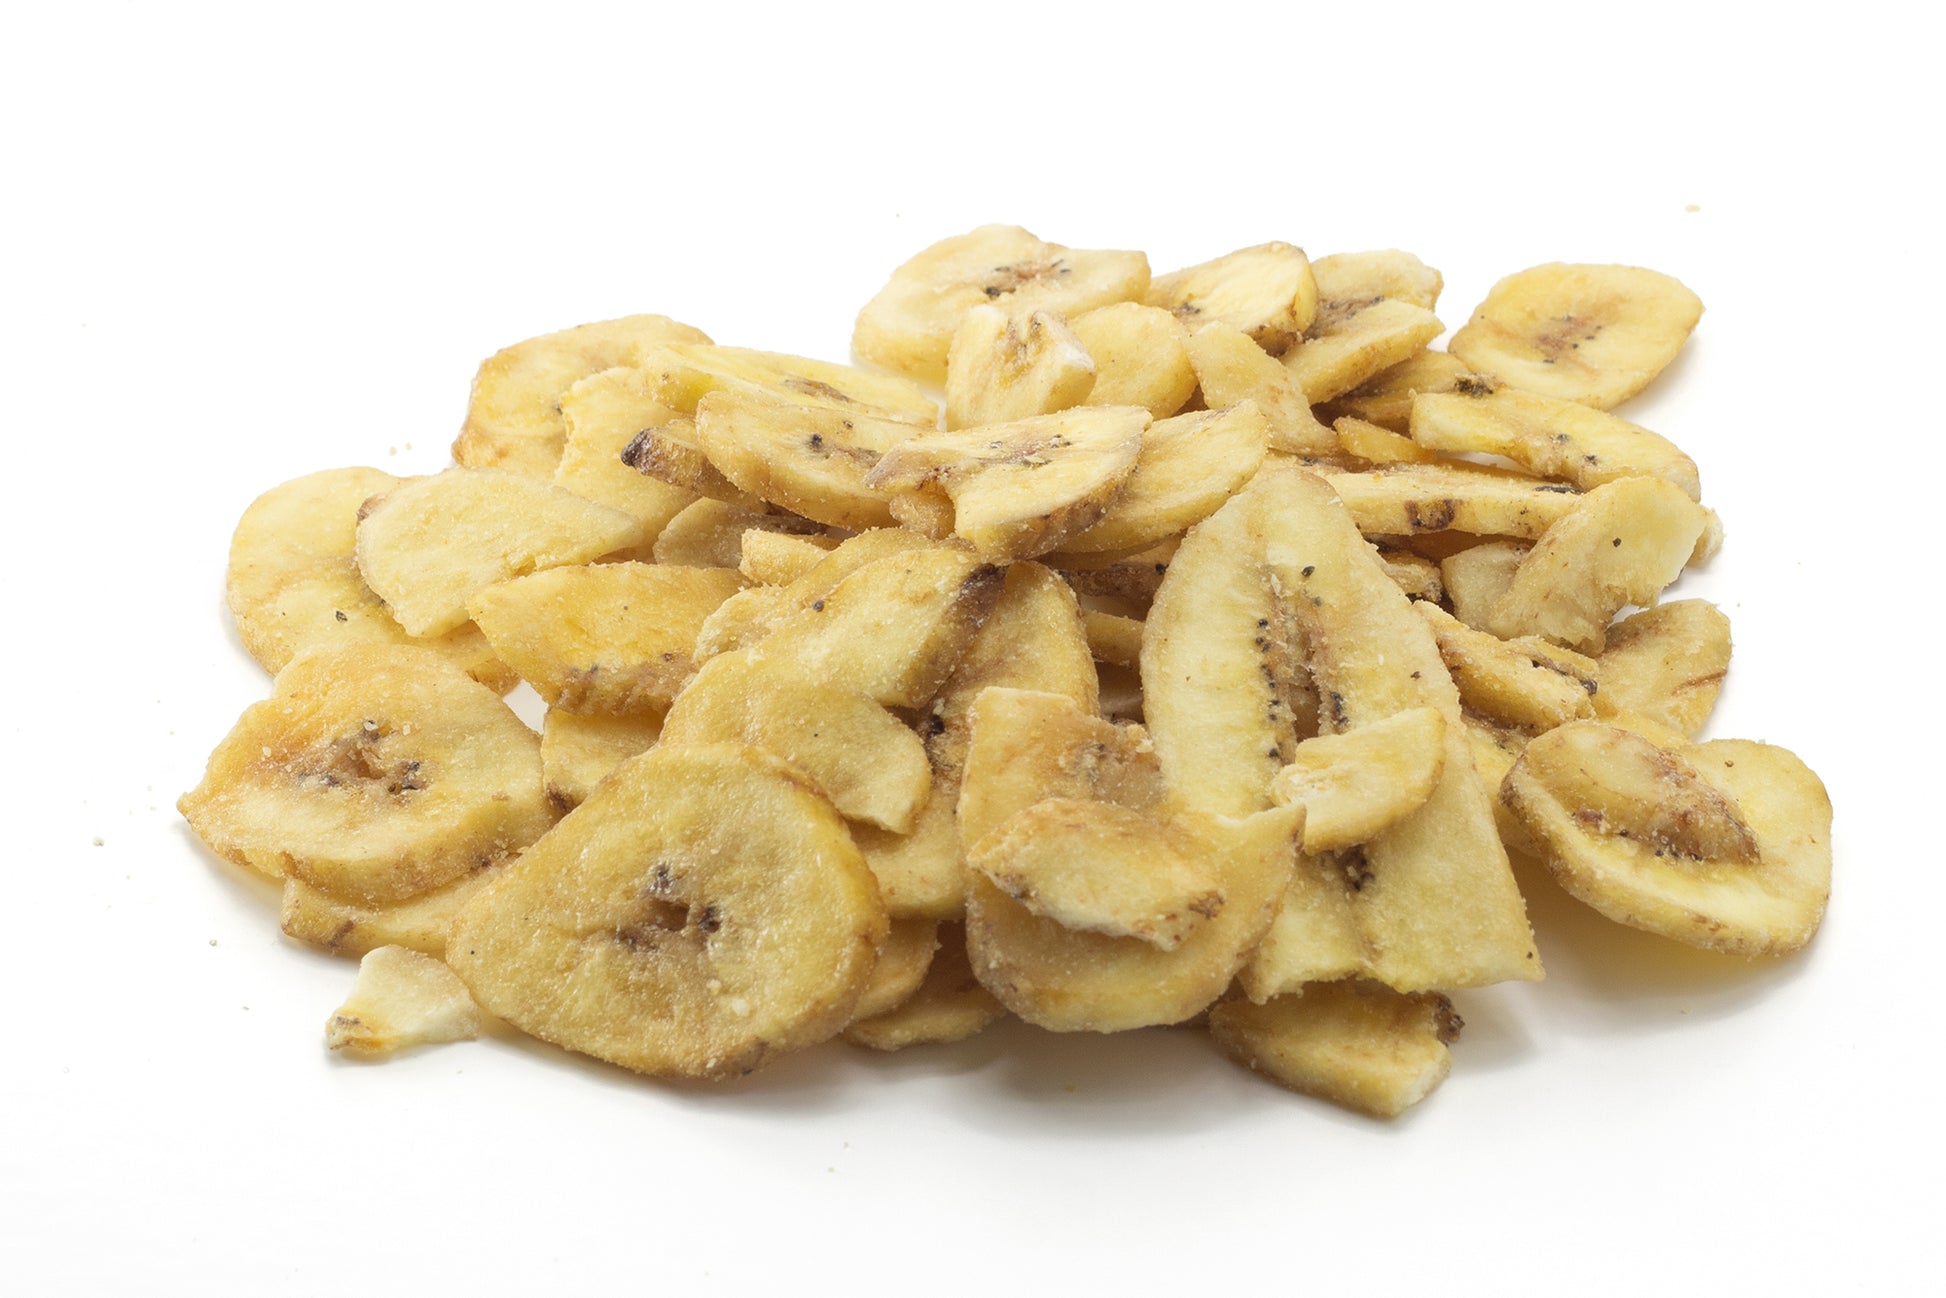 A pile of dried banana slices